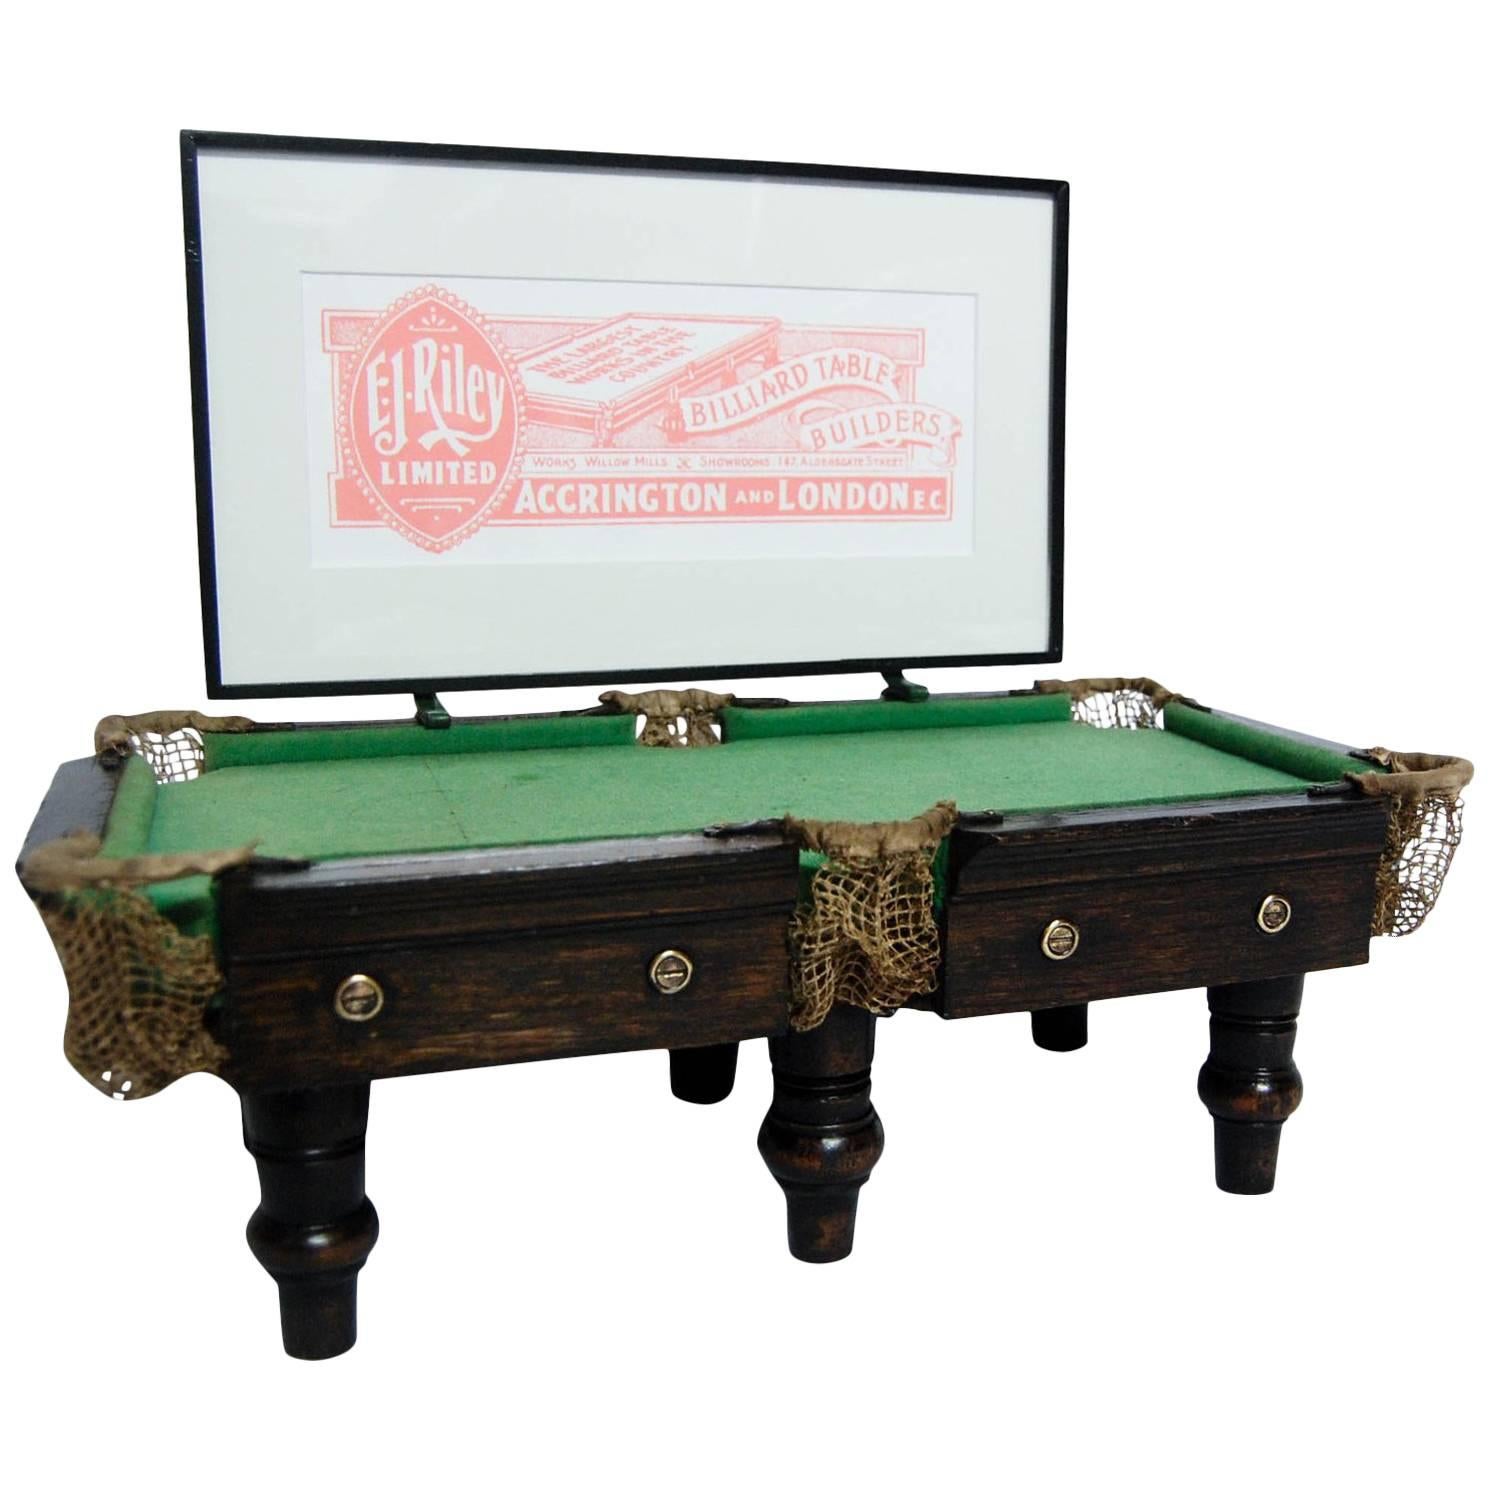 Miniature Billiards Table Shop Advertising display for E.J. Riley c1920